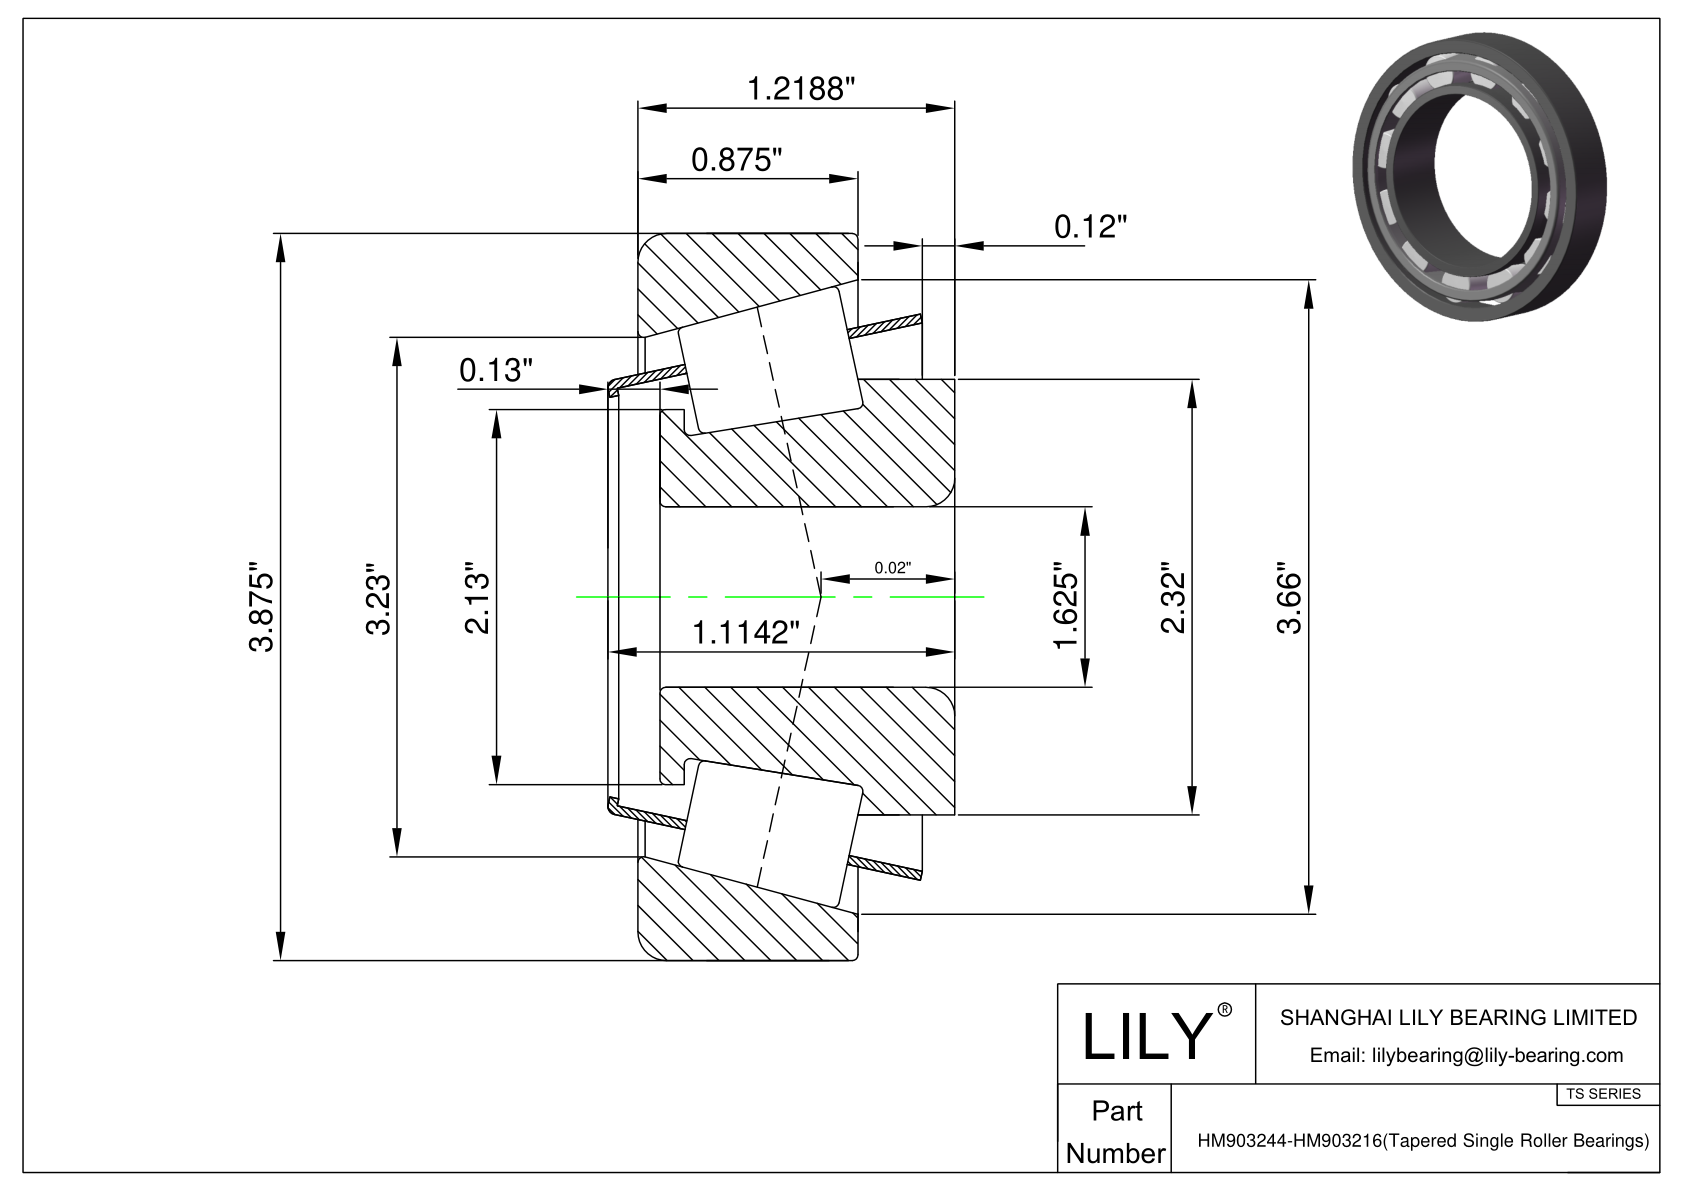 HM903244-HM903216 TS (Tapered Single Roller Bearings) (Imperial) cad drawing